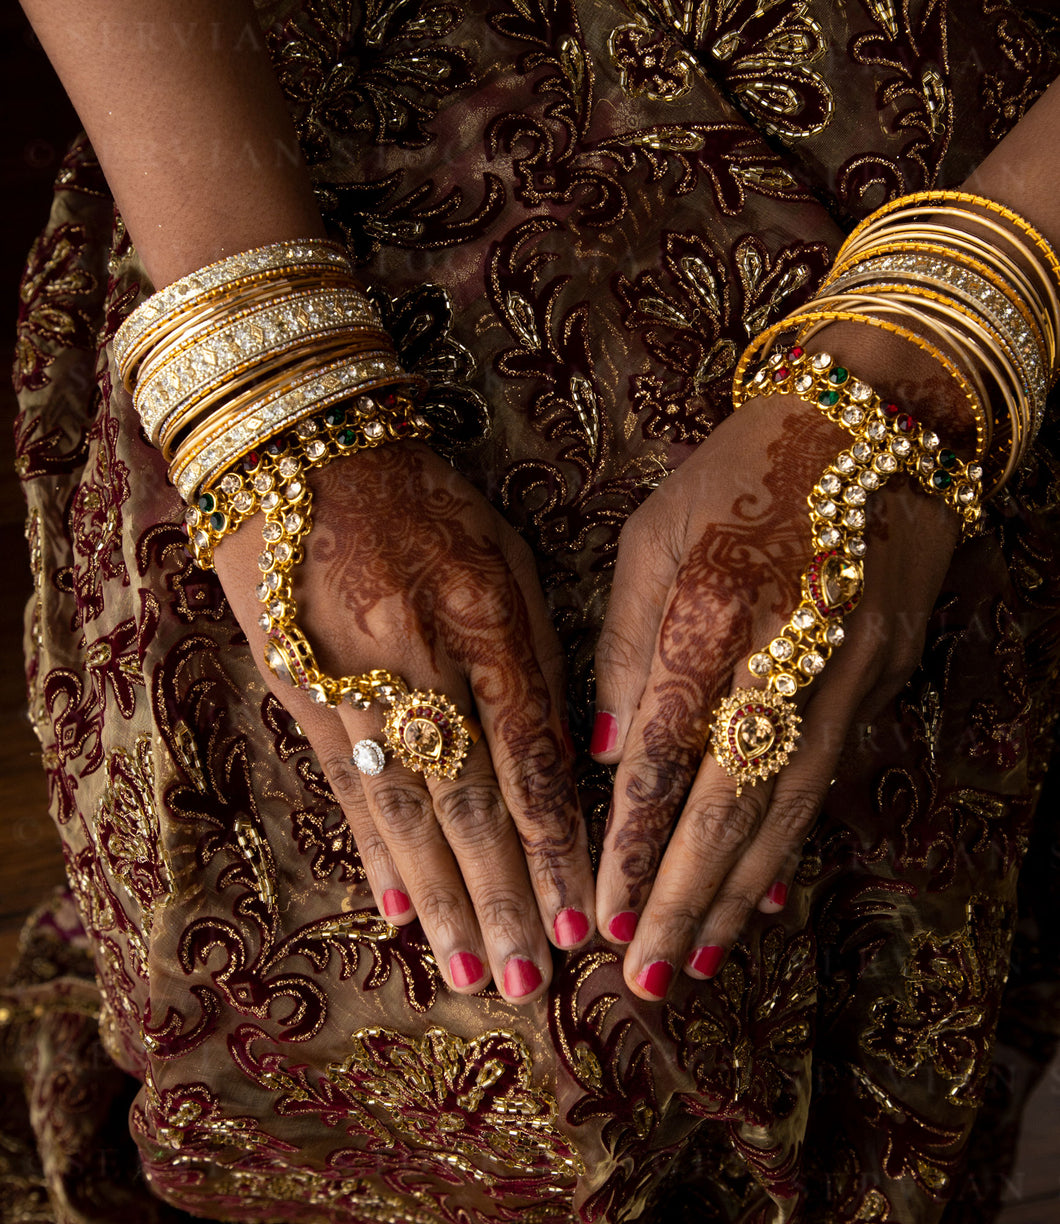 Woman wearing a sari and gold jewellery with mehendi on her hands (Shelaila 4418)